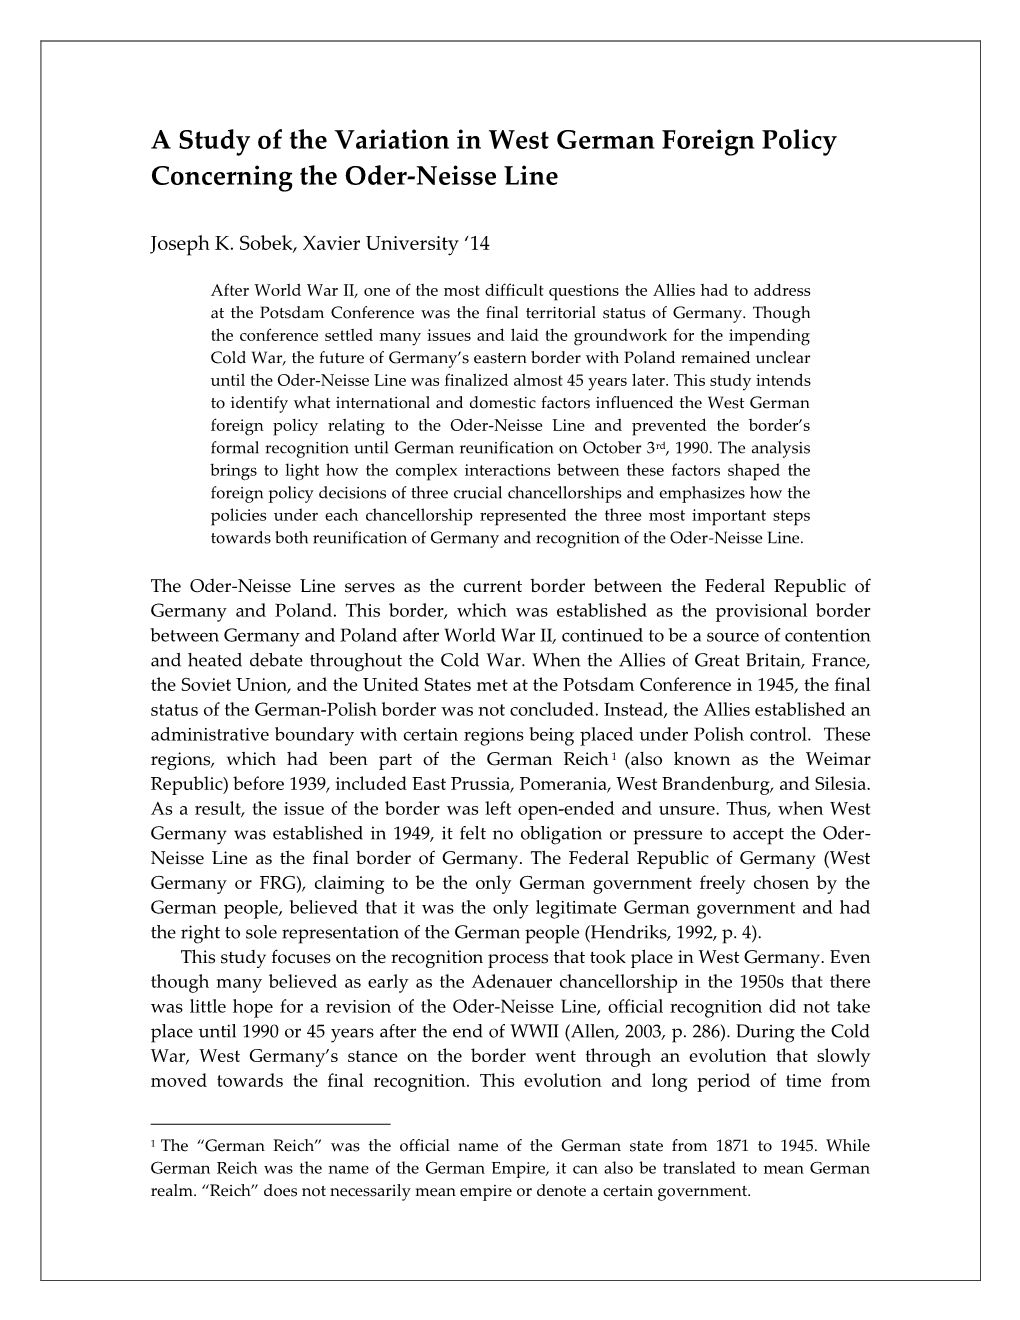 A Study of the Variation in West German Foreign Policy Concerning the Oder-Neisse Line